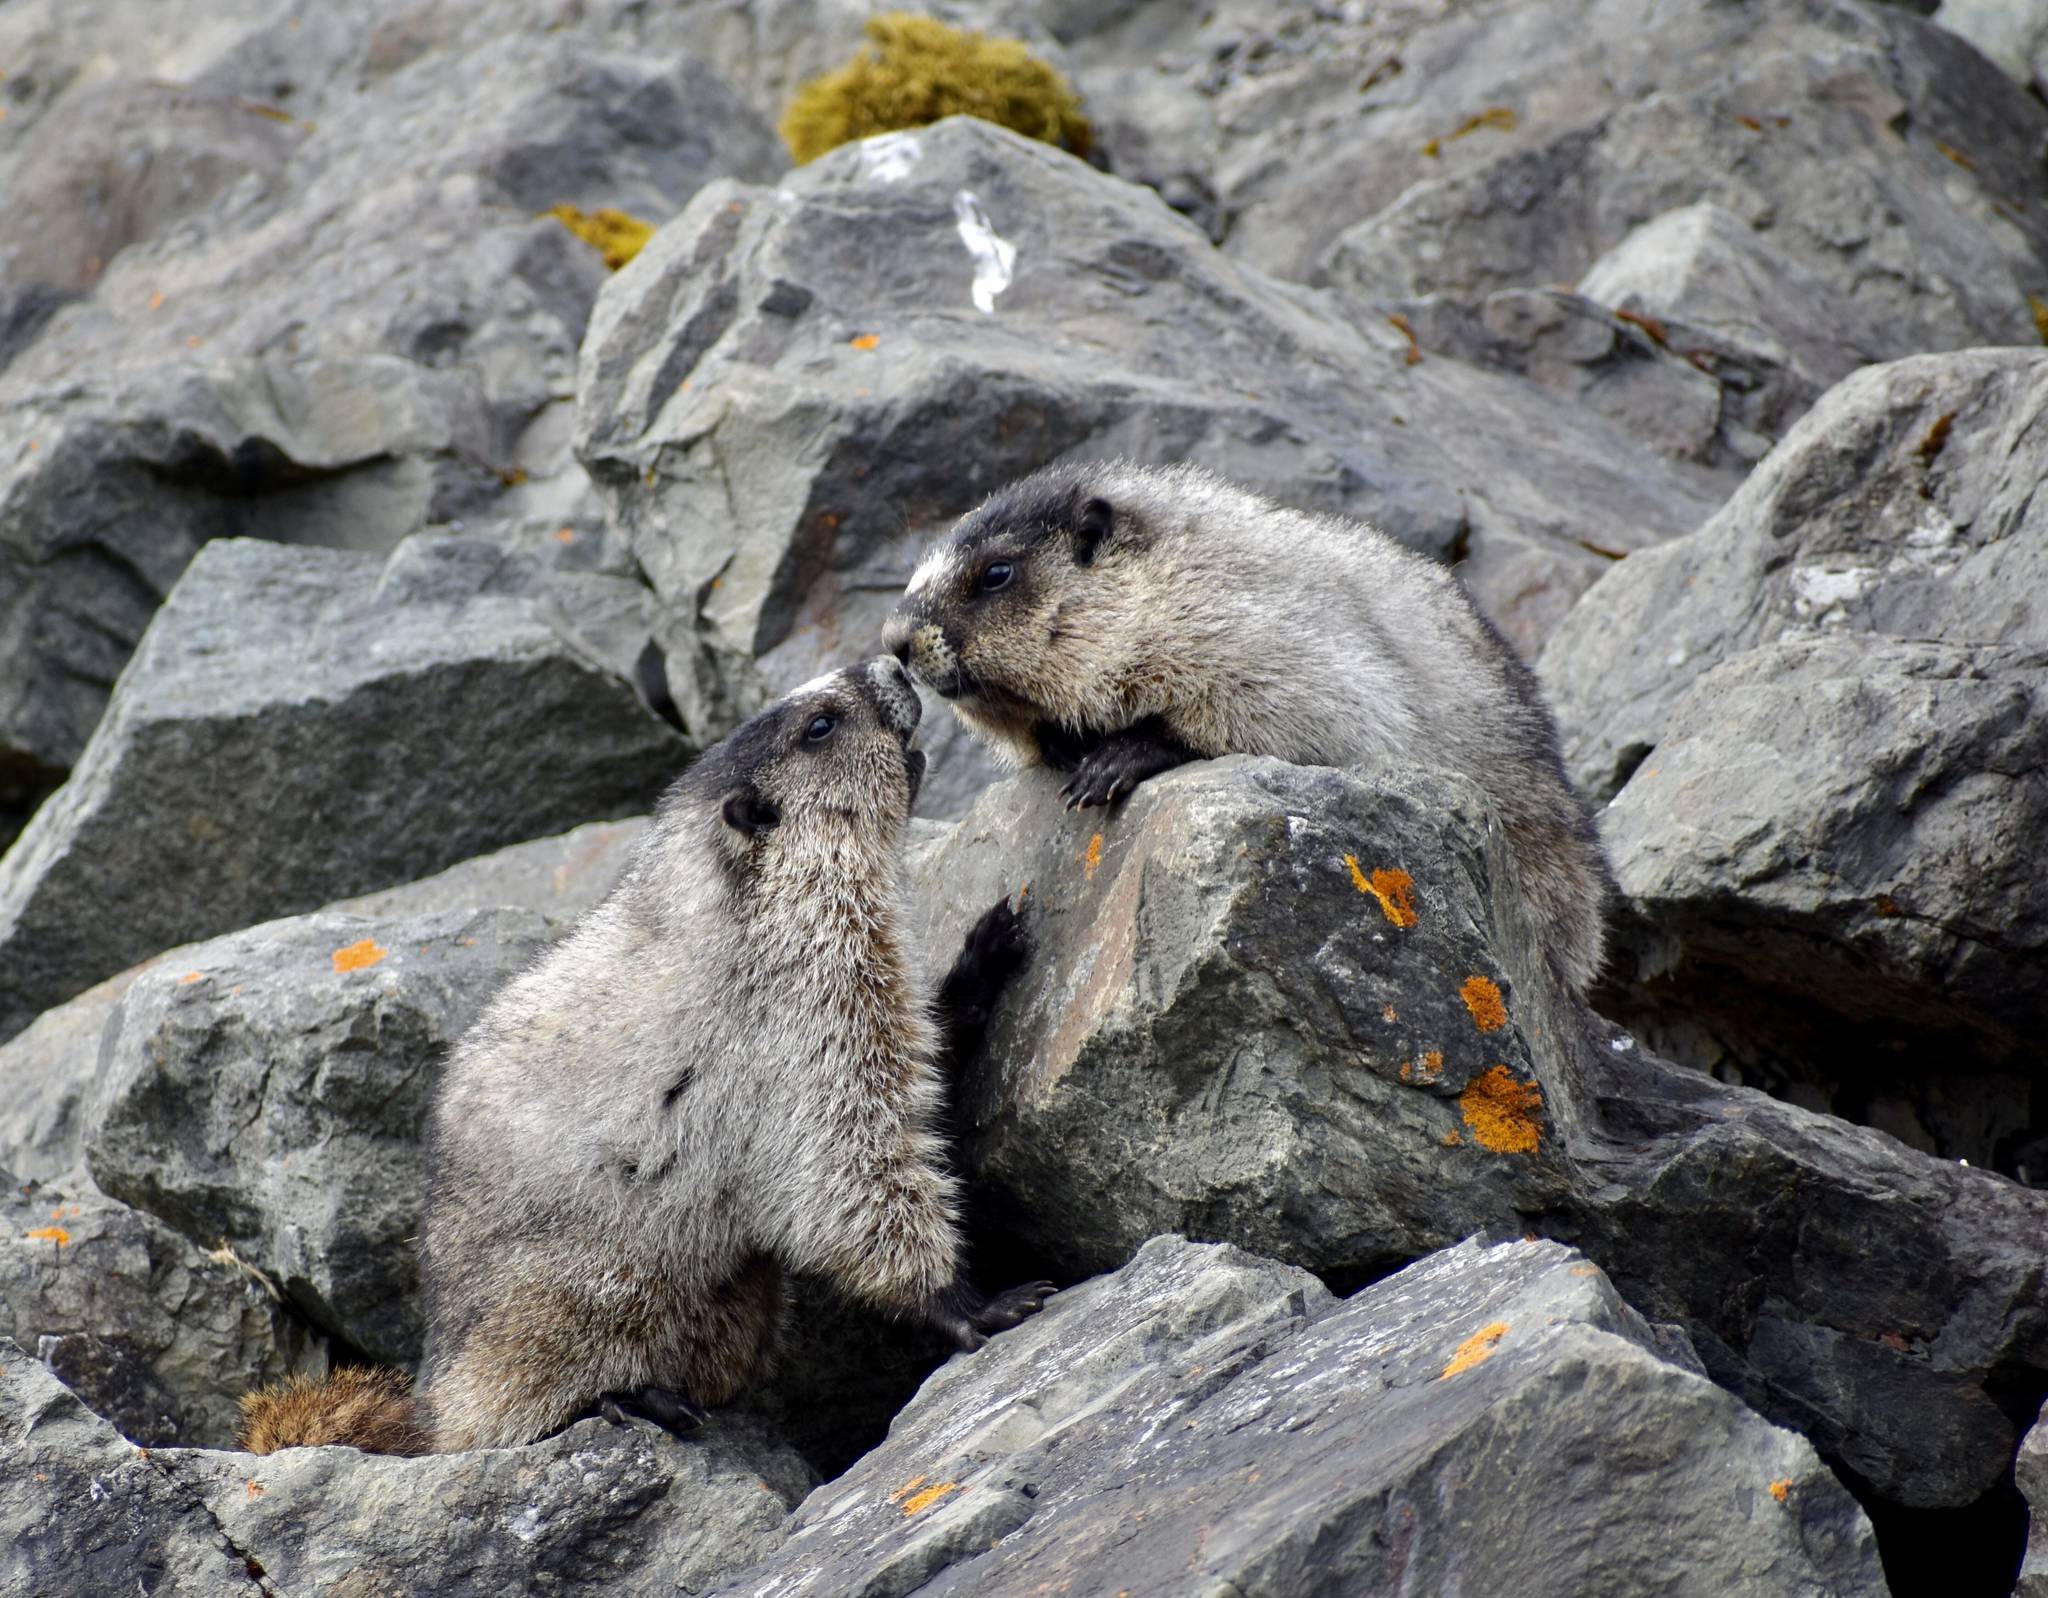 “Love is in the air” Marmot being affectionate to each other near the Shrine of St. Therese on May 1, 2021. (Courtesy Photo / Virginia Kelly)